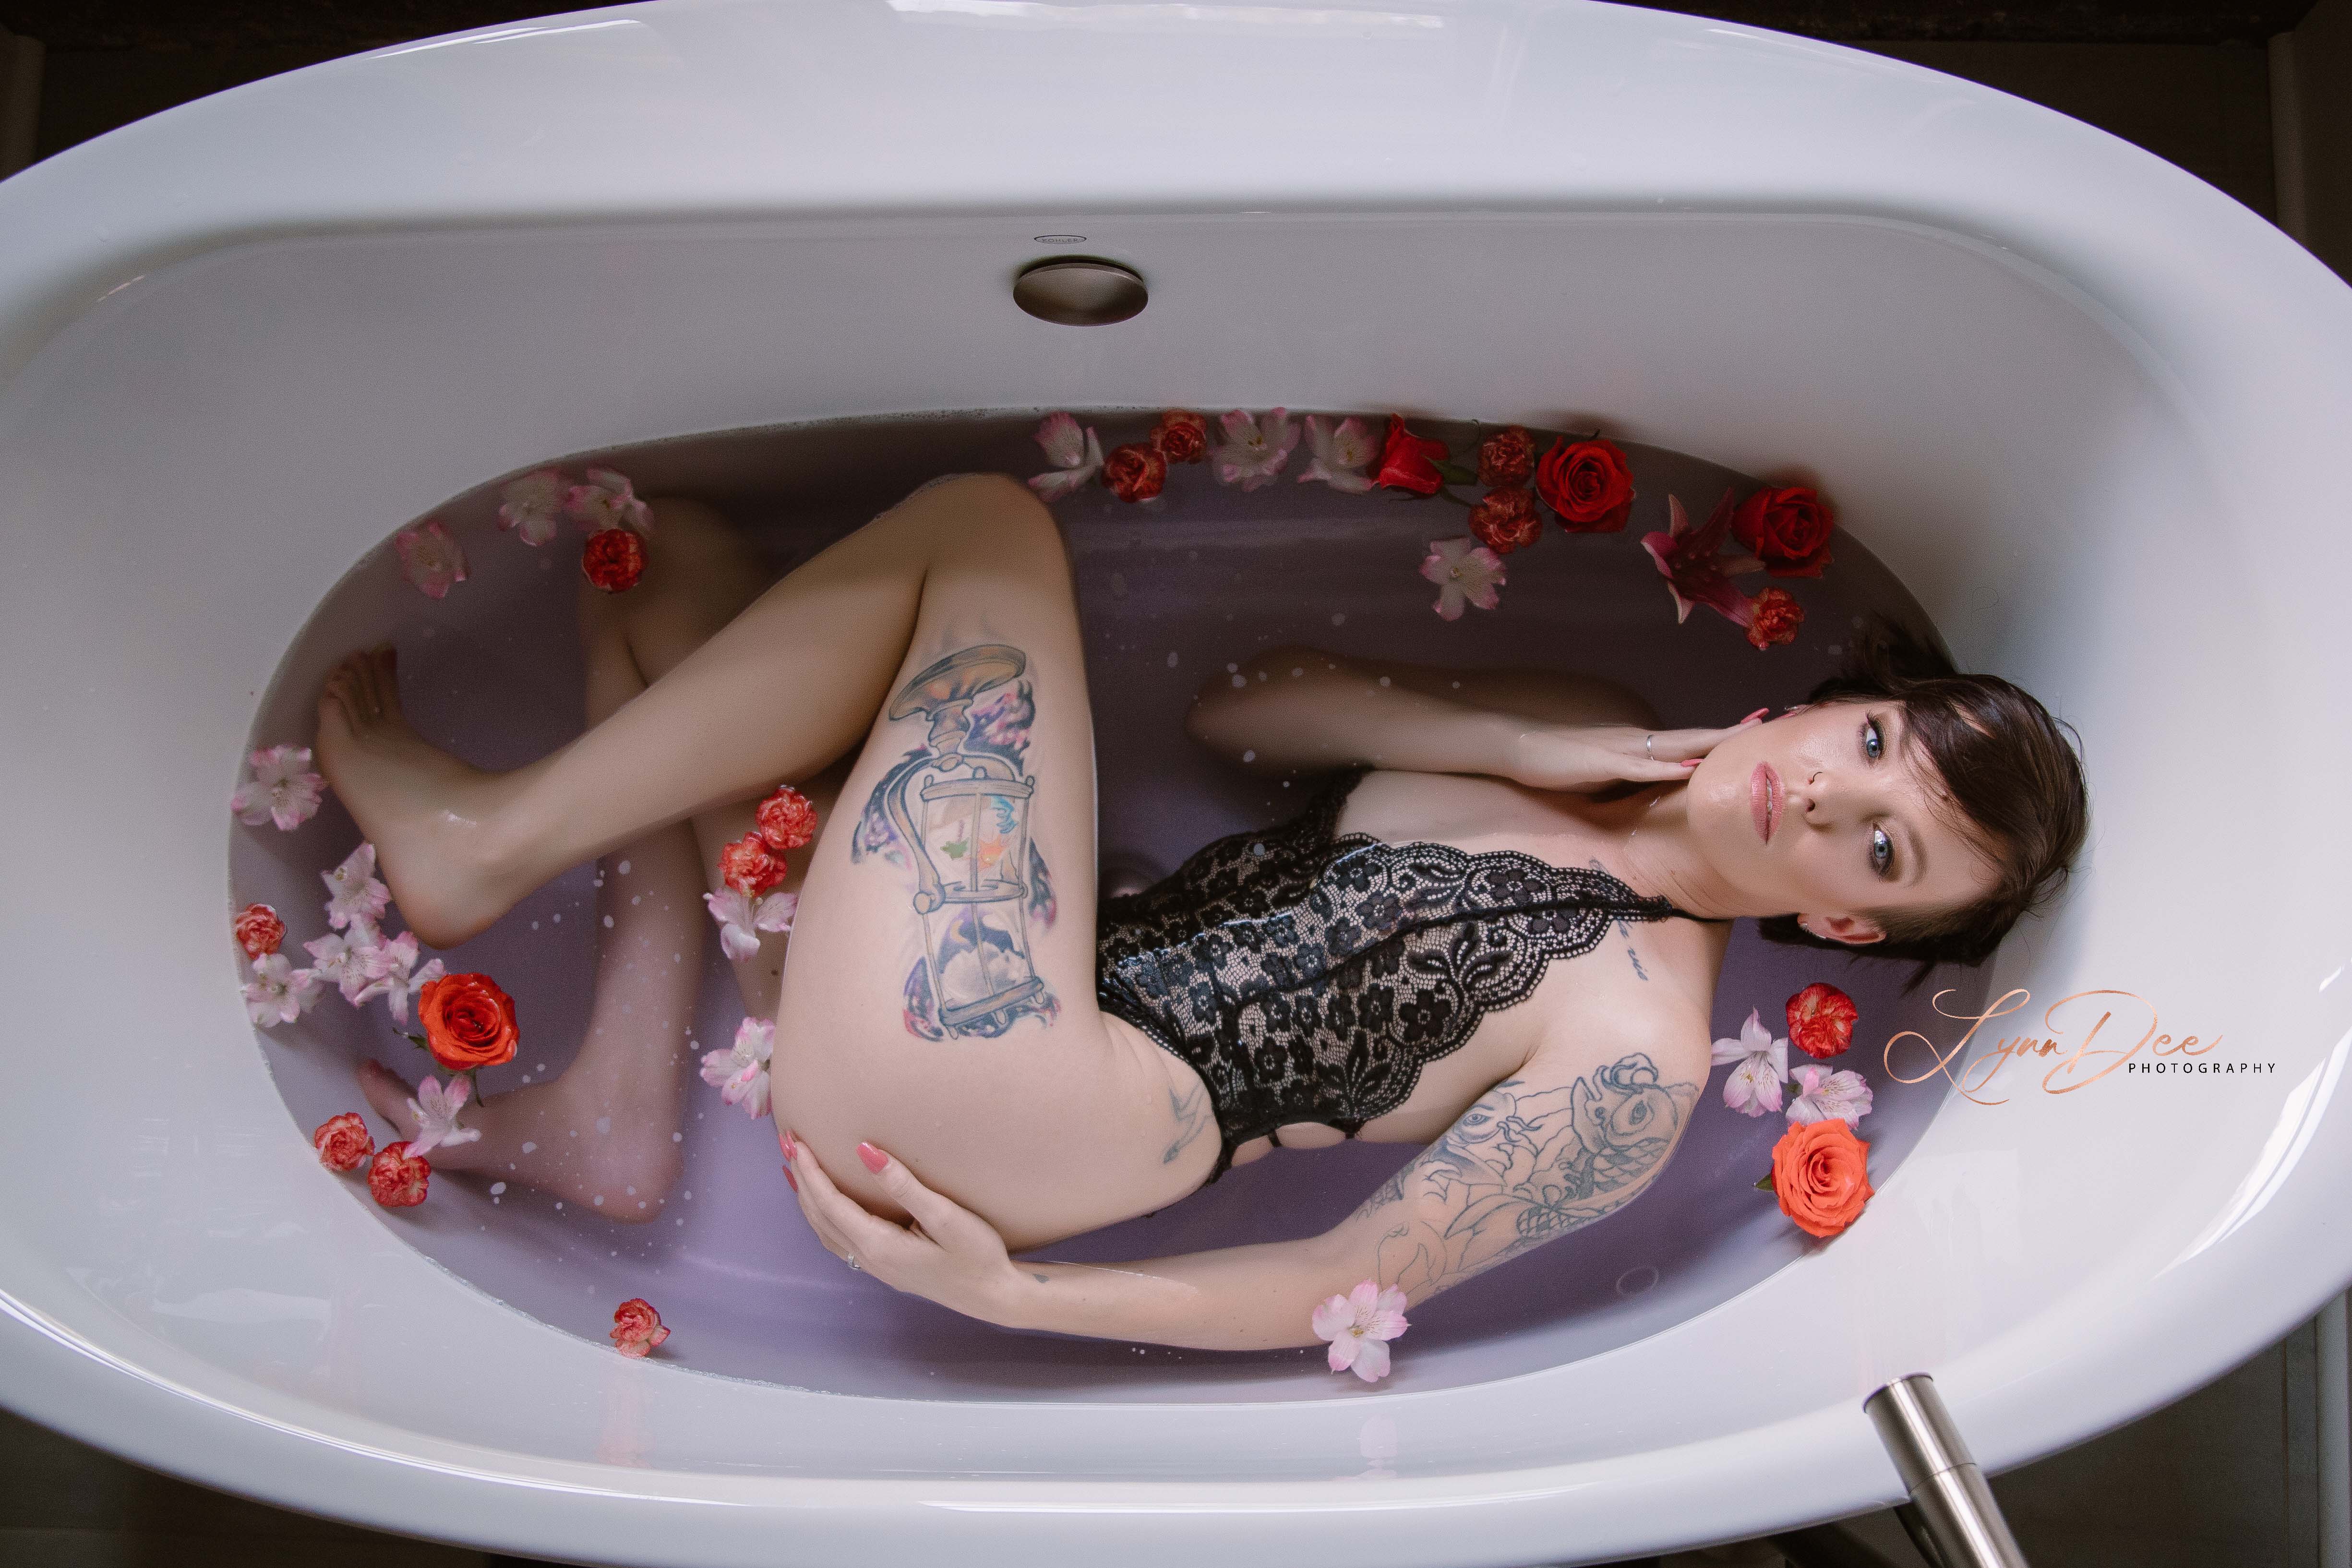 woman lying on her side in a bathtub filled with flowers